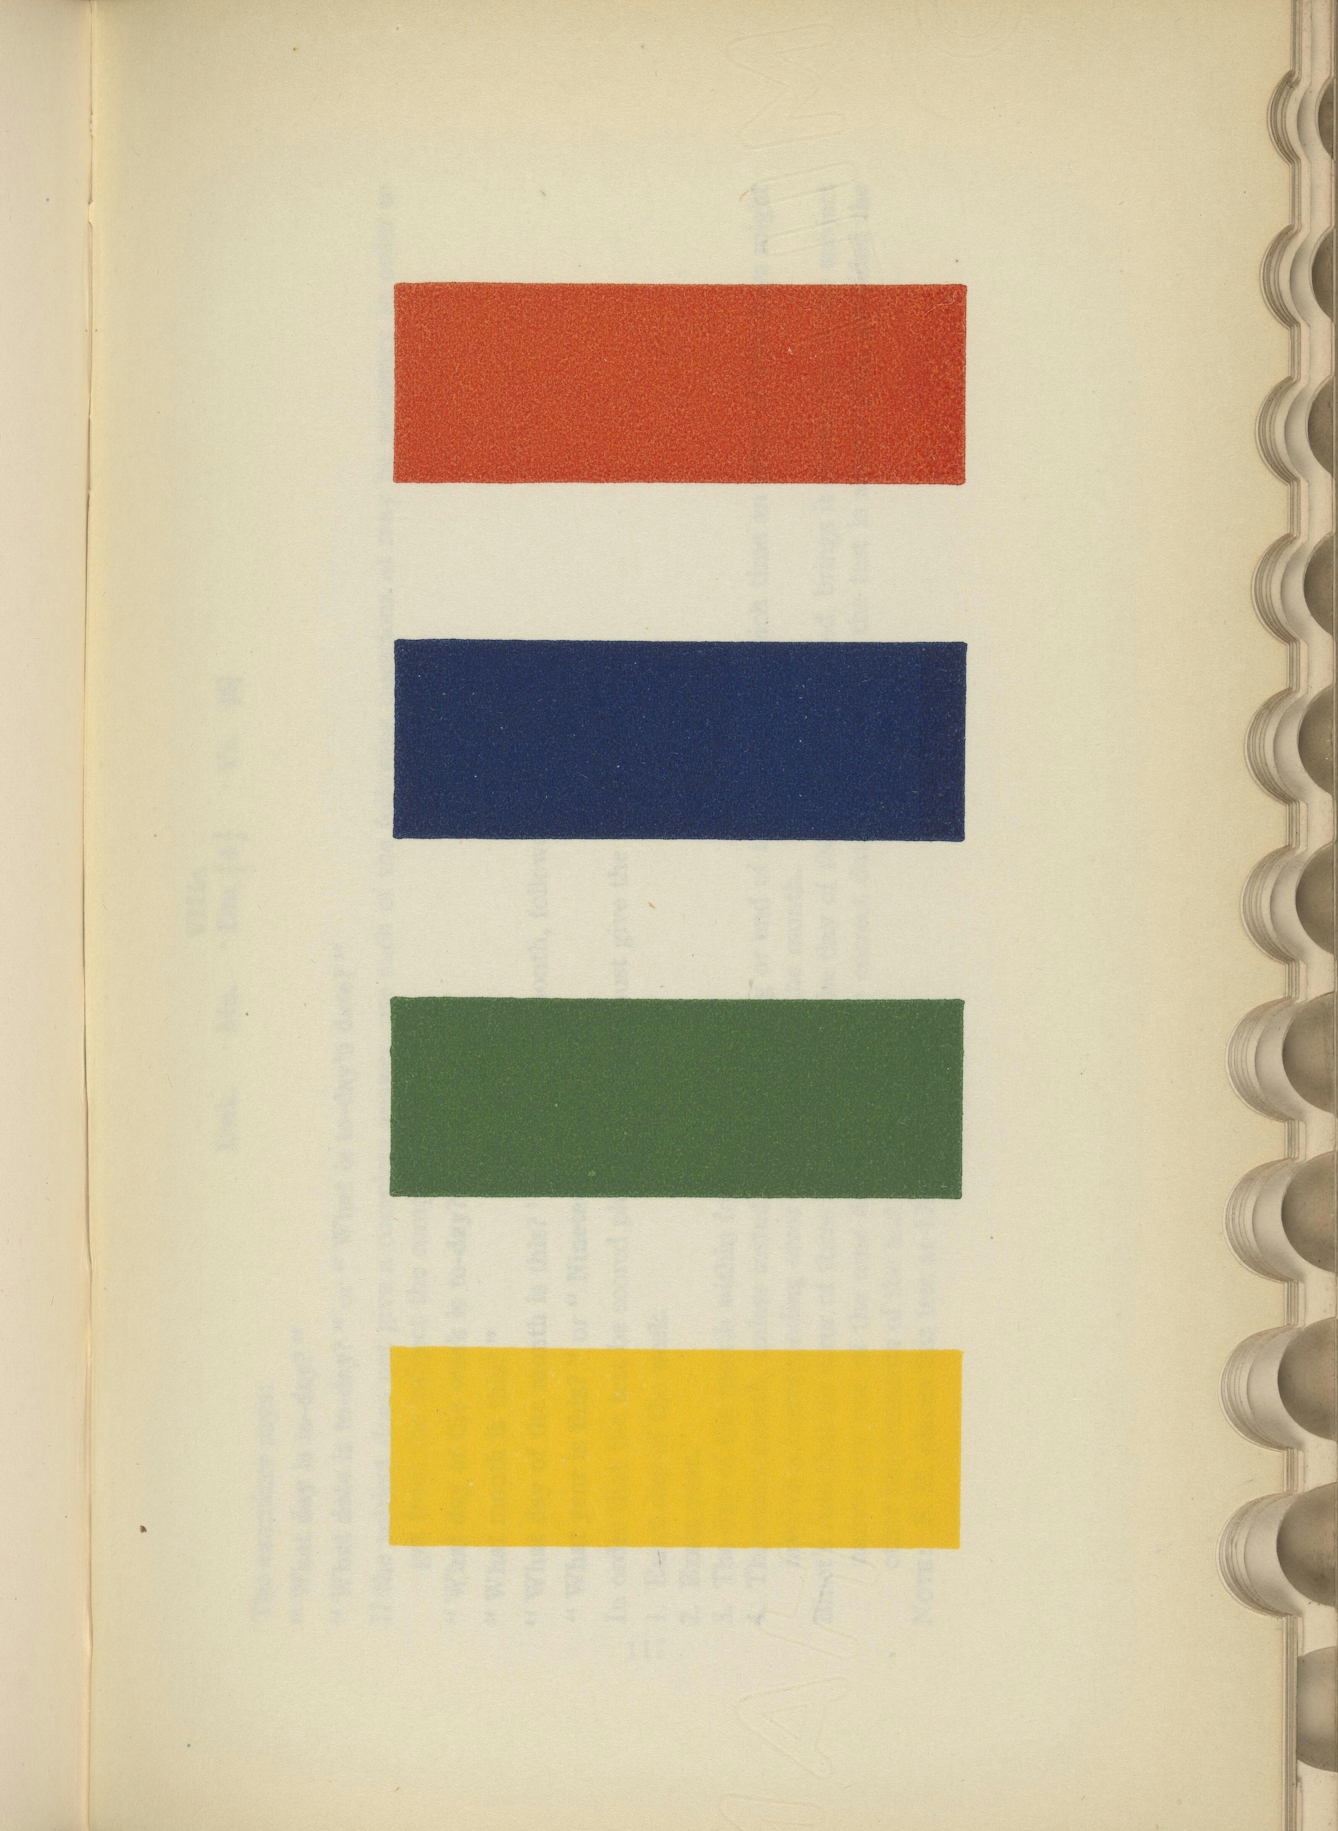 A page from a book showing four uniform blocks, each one a different colour.